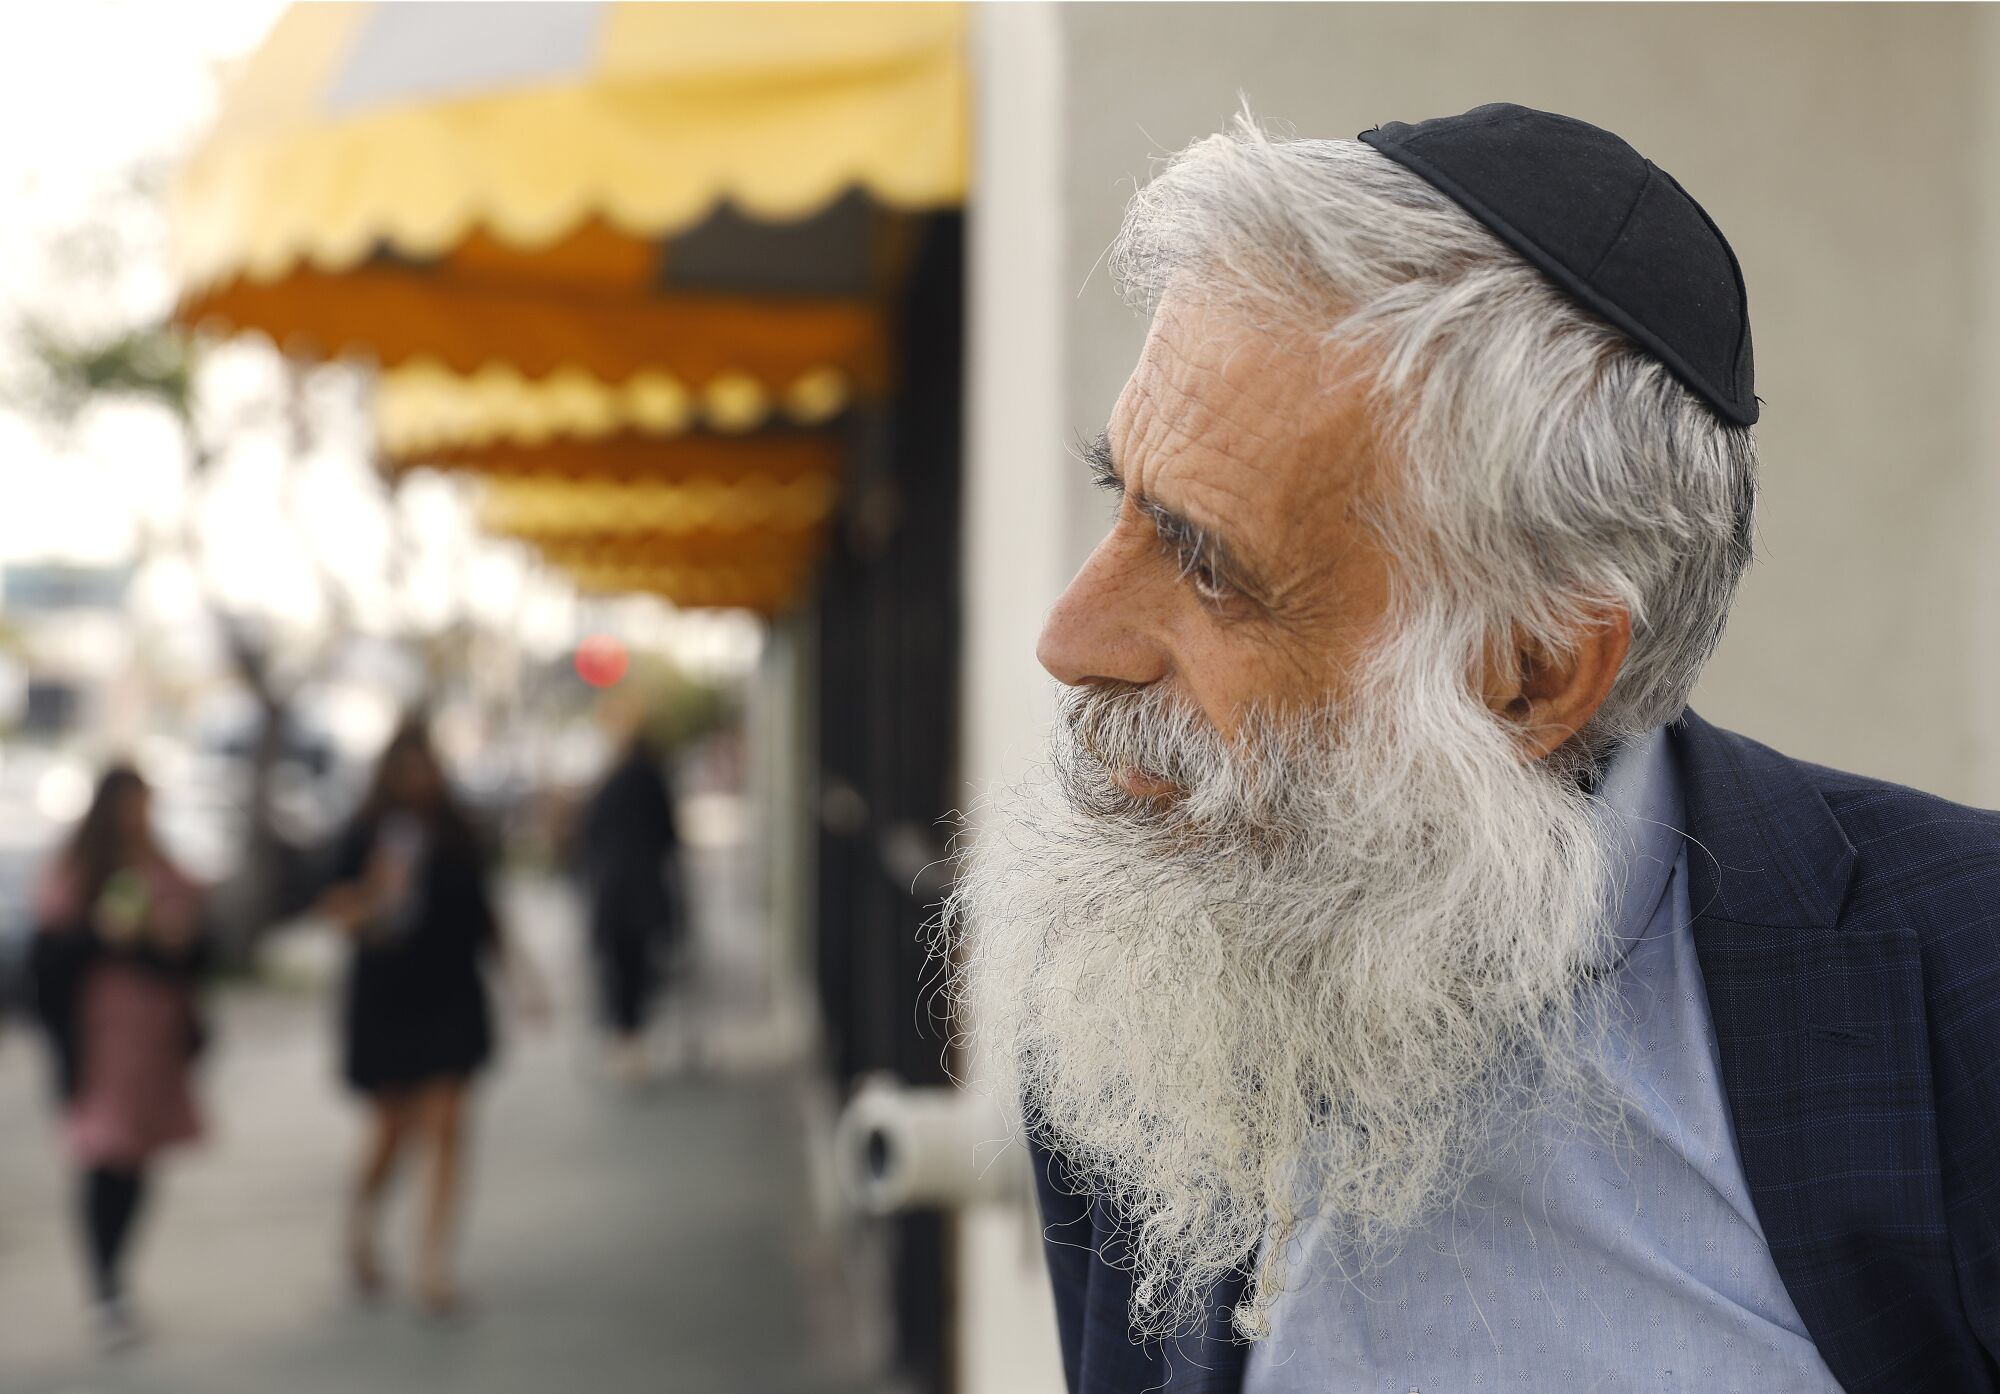 Joseph Haber, 55, is photographed outside Elat Market in the Pico-Robertson area of Los Angeles. 